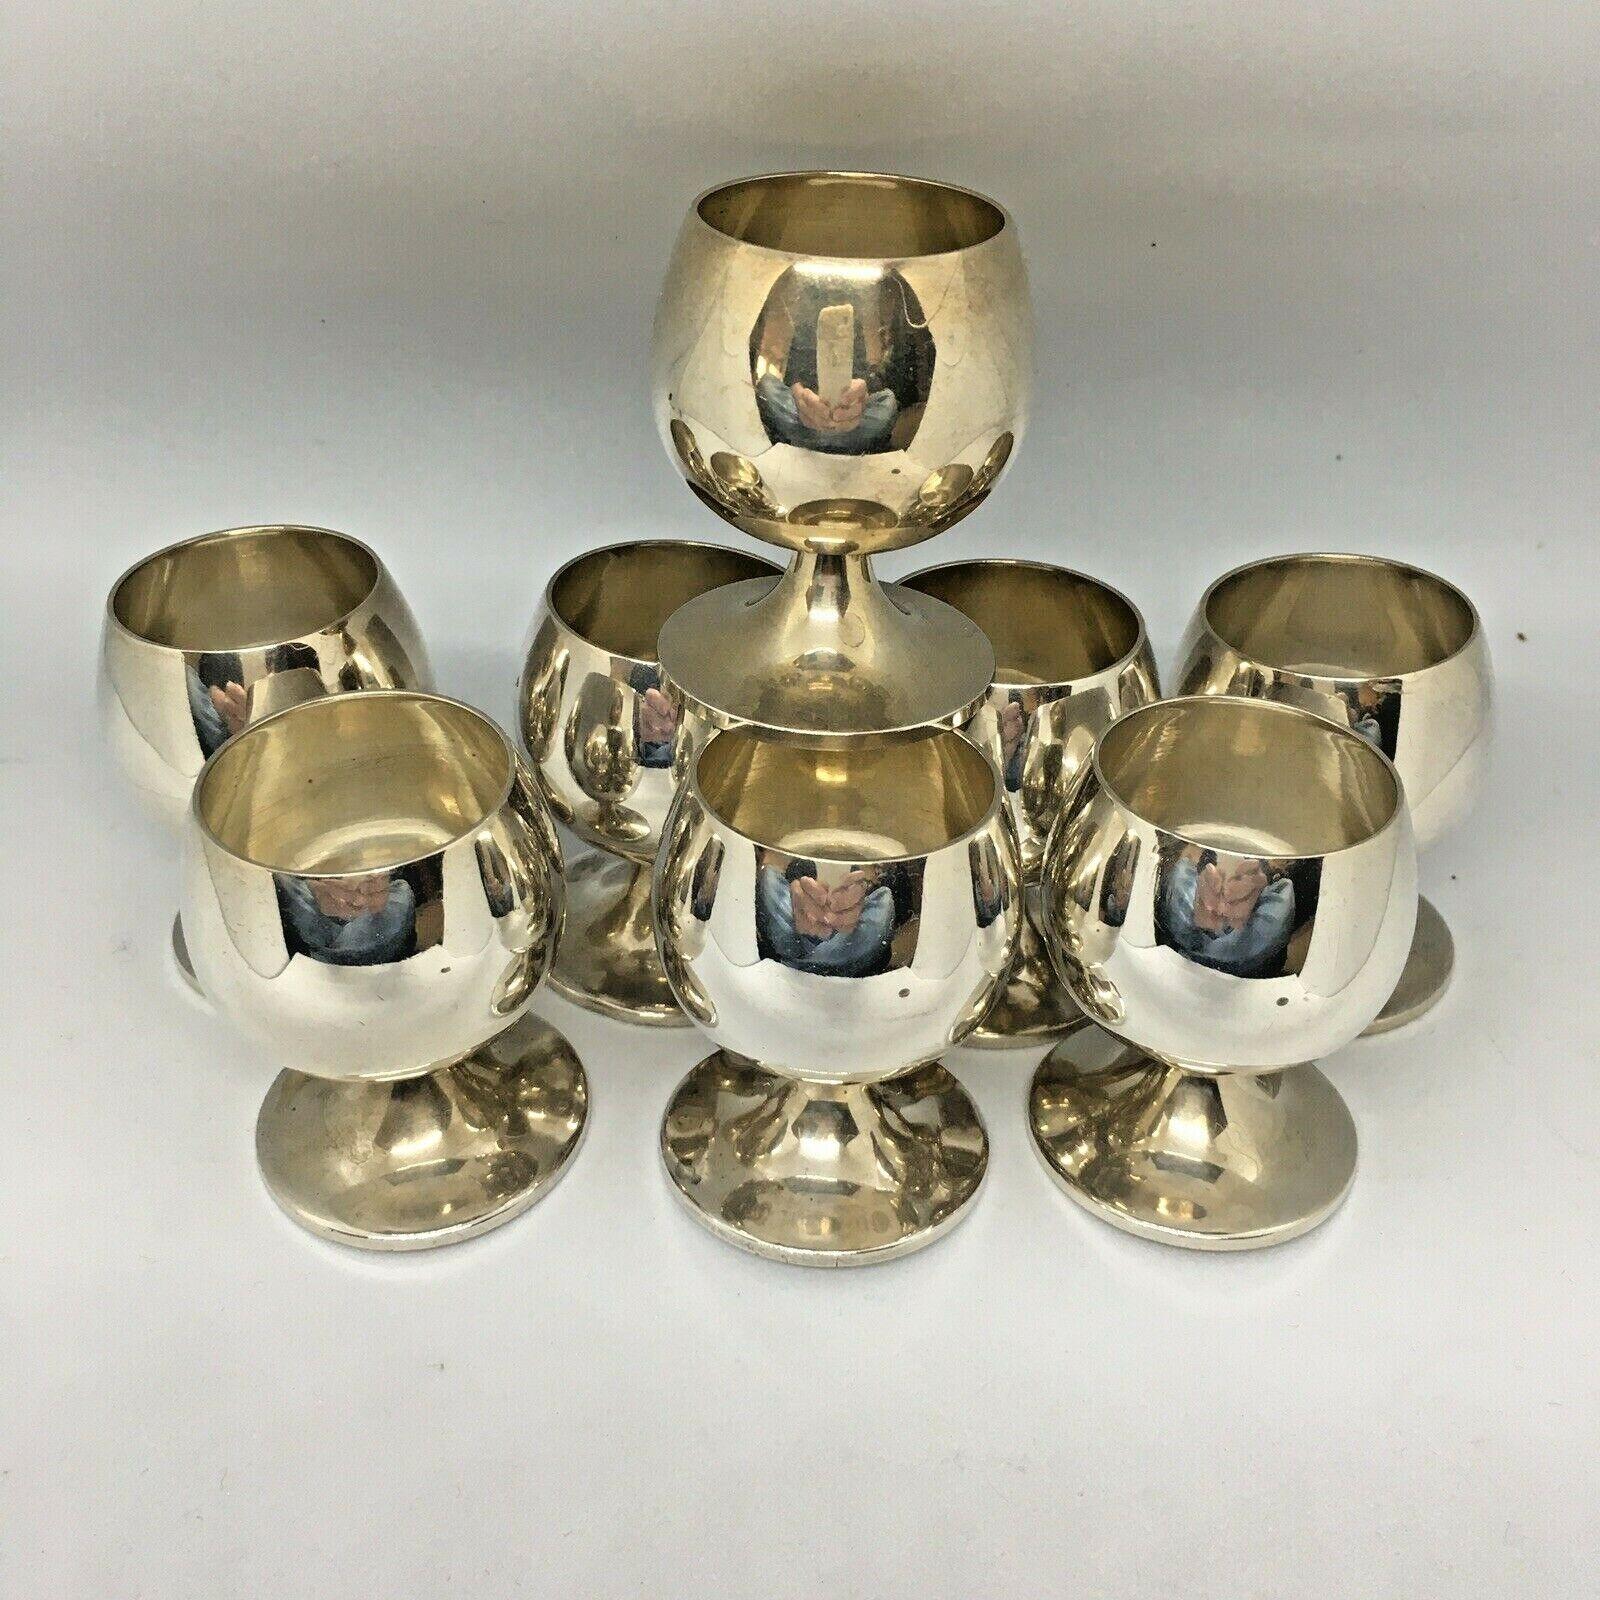 Tiffany & Co Sterling Silver Cup Shot Glass & Tray Set 

Marked 22595L on Cups and 23336 on Tray
Total weight of 497 gram
Cup base diameter 1 1/2 inch, 2 inch tall
Tray at 6 inch diameter
Normal wear and tear, no damage, none personalized, no